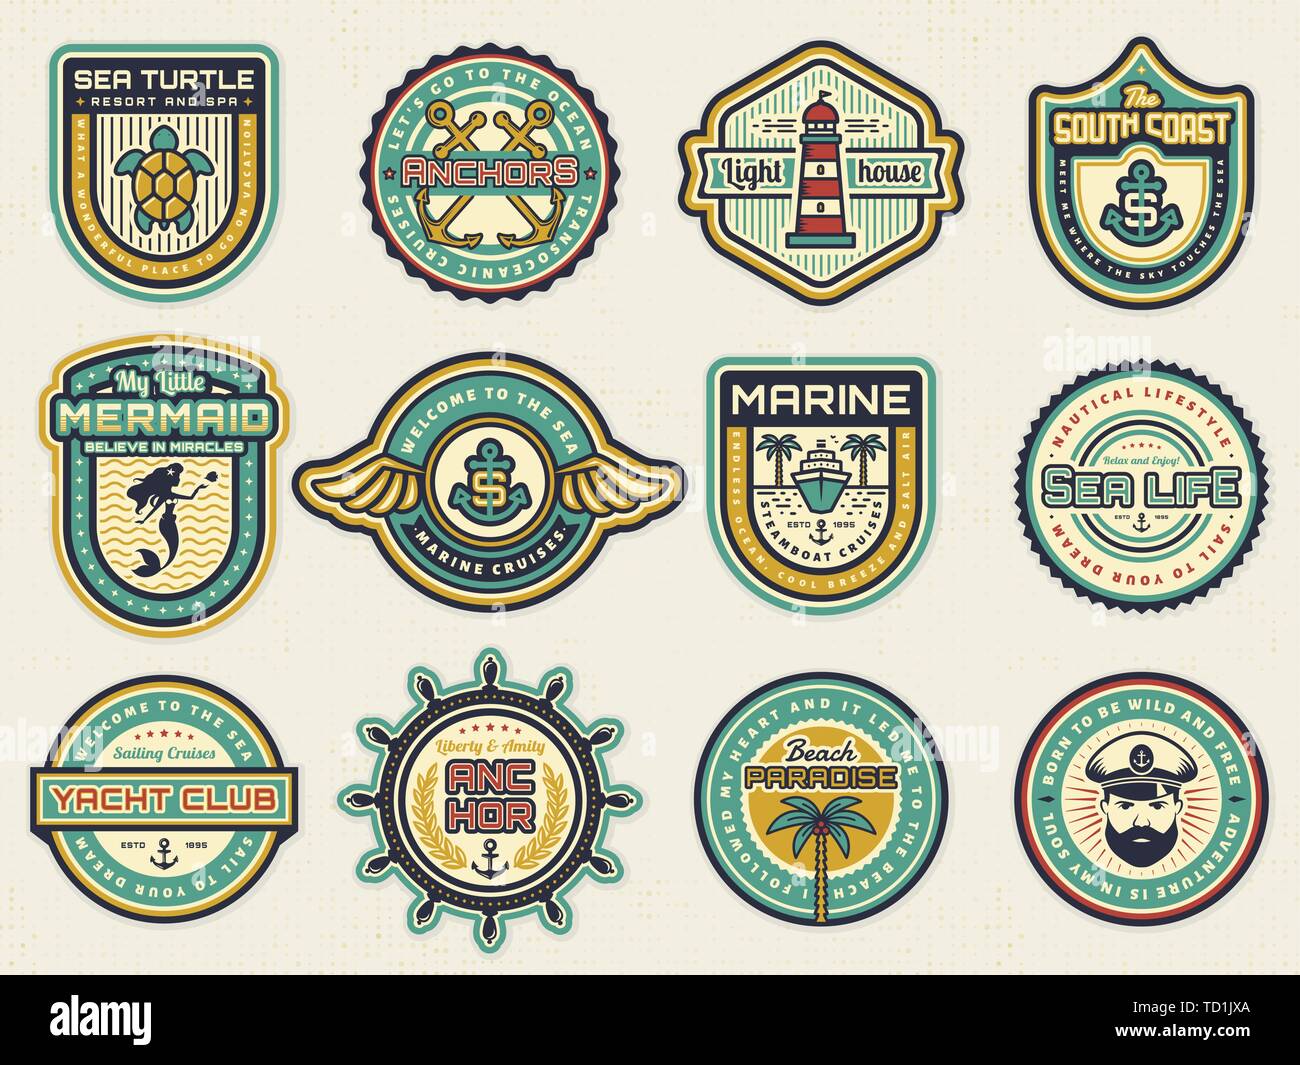 Retro nautical emblem set with anchors, steering wheel, lighthouse. Cruise, yachting, travel, sea life, beach resort themes. Vintage vector badges. Stock Vector